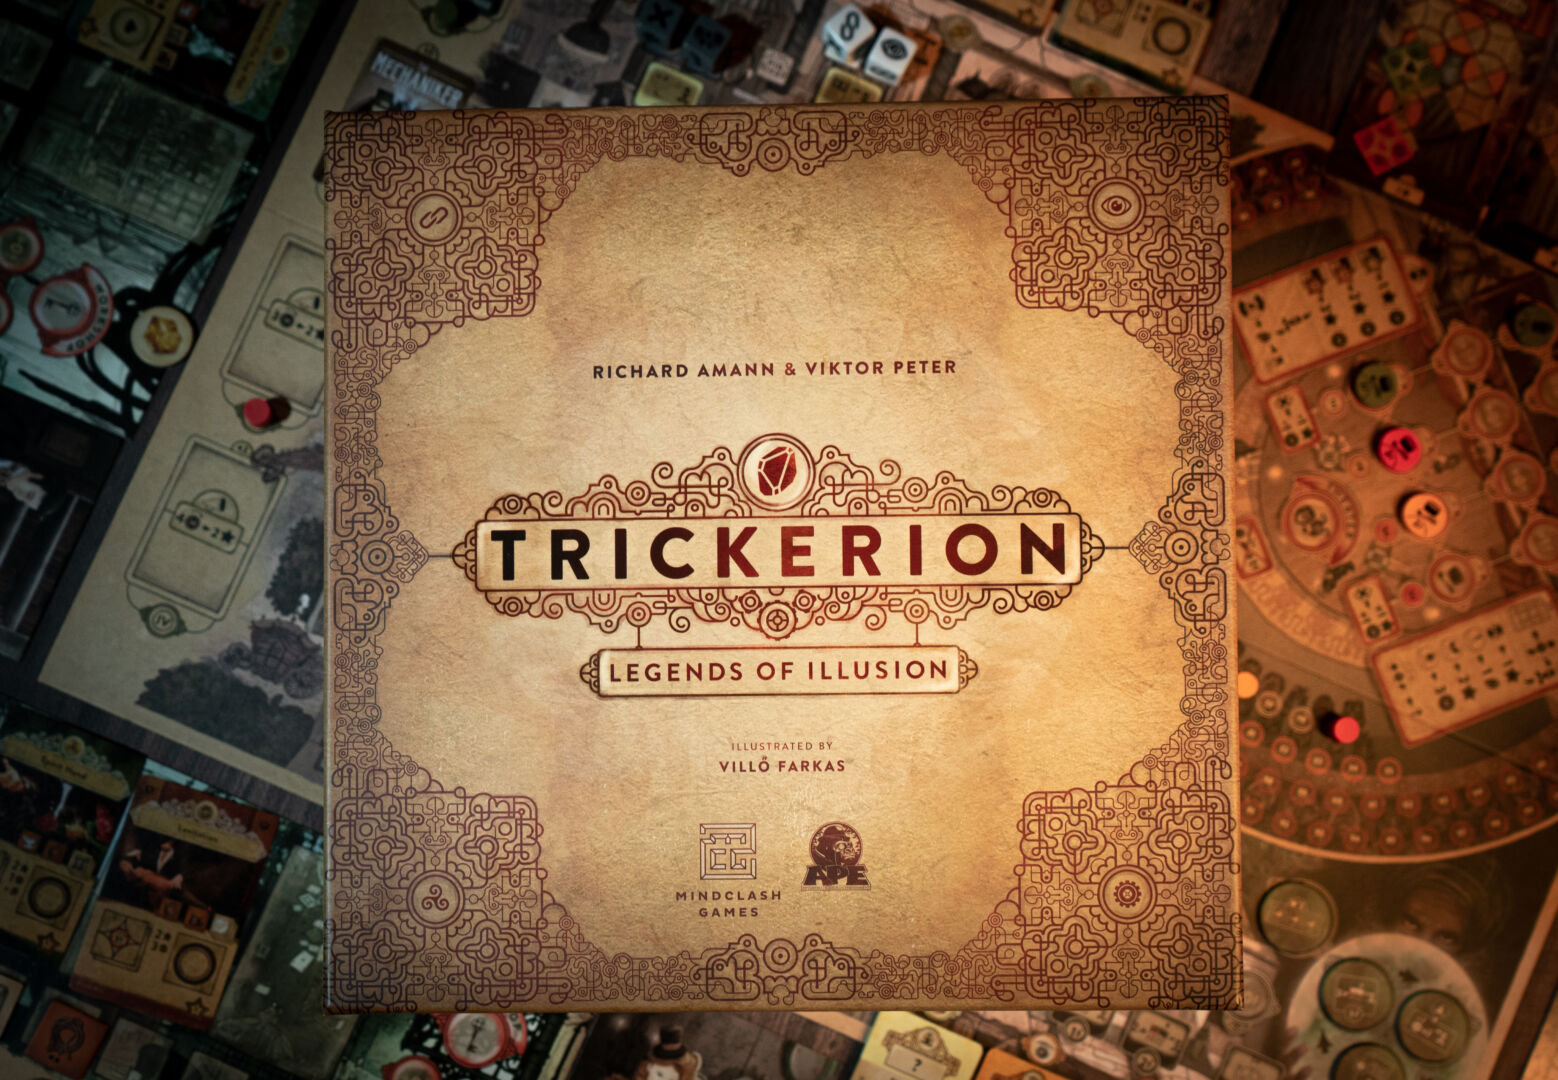 Trickerion back in stock!